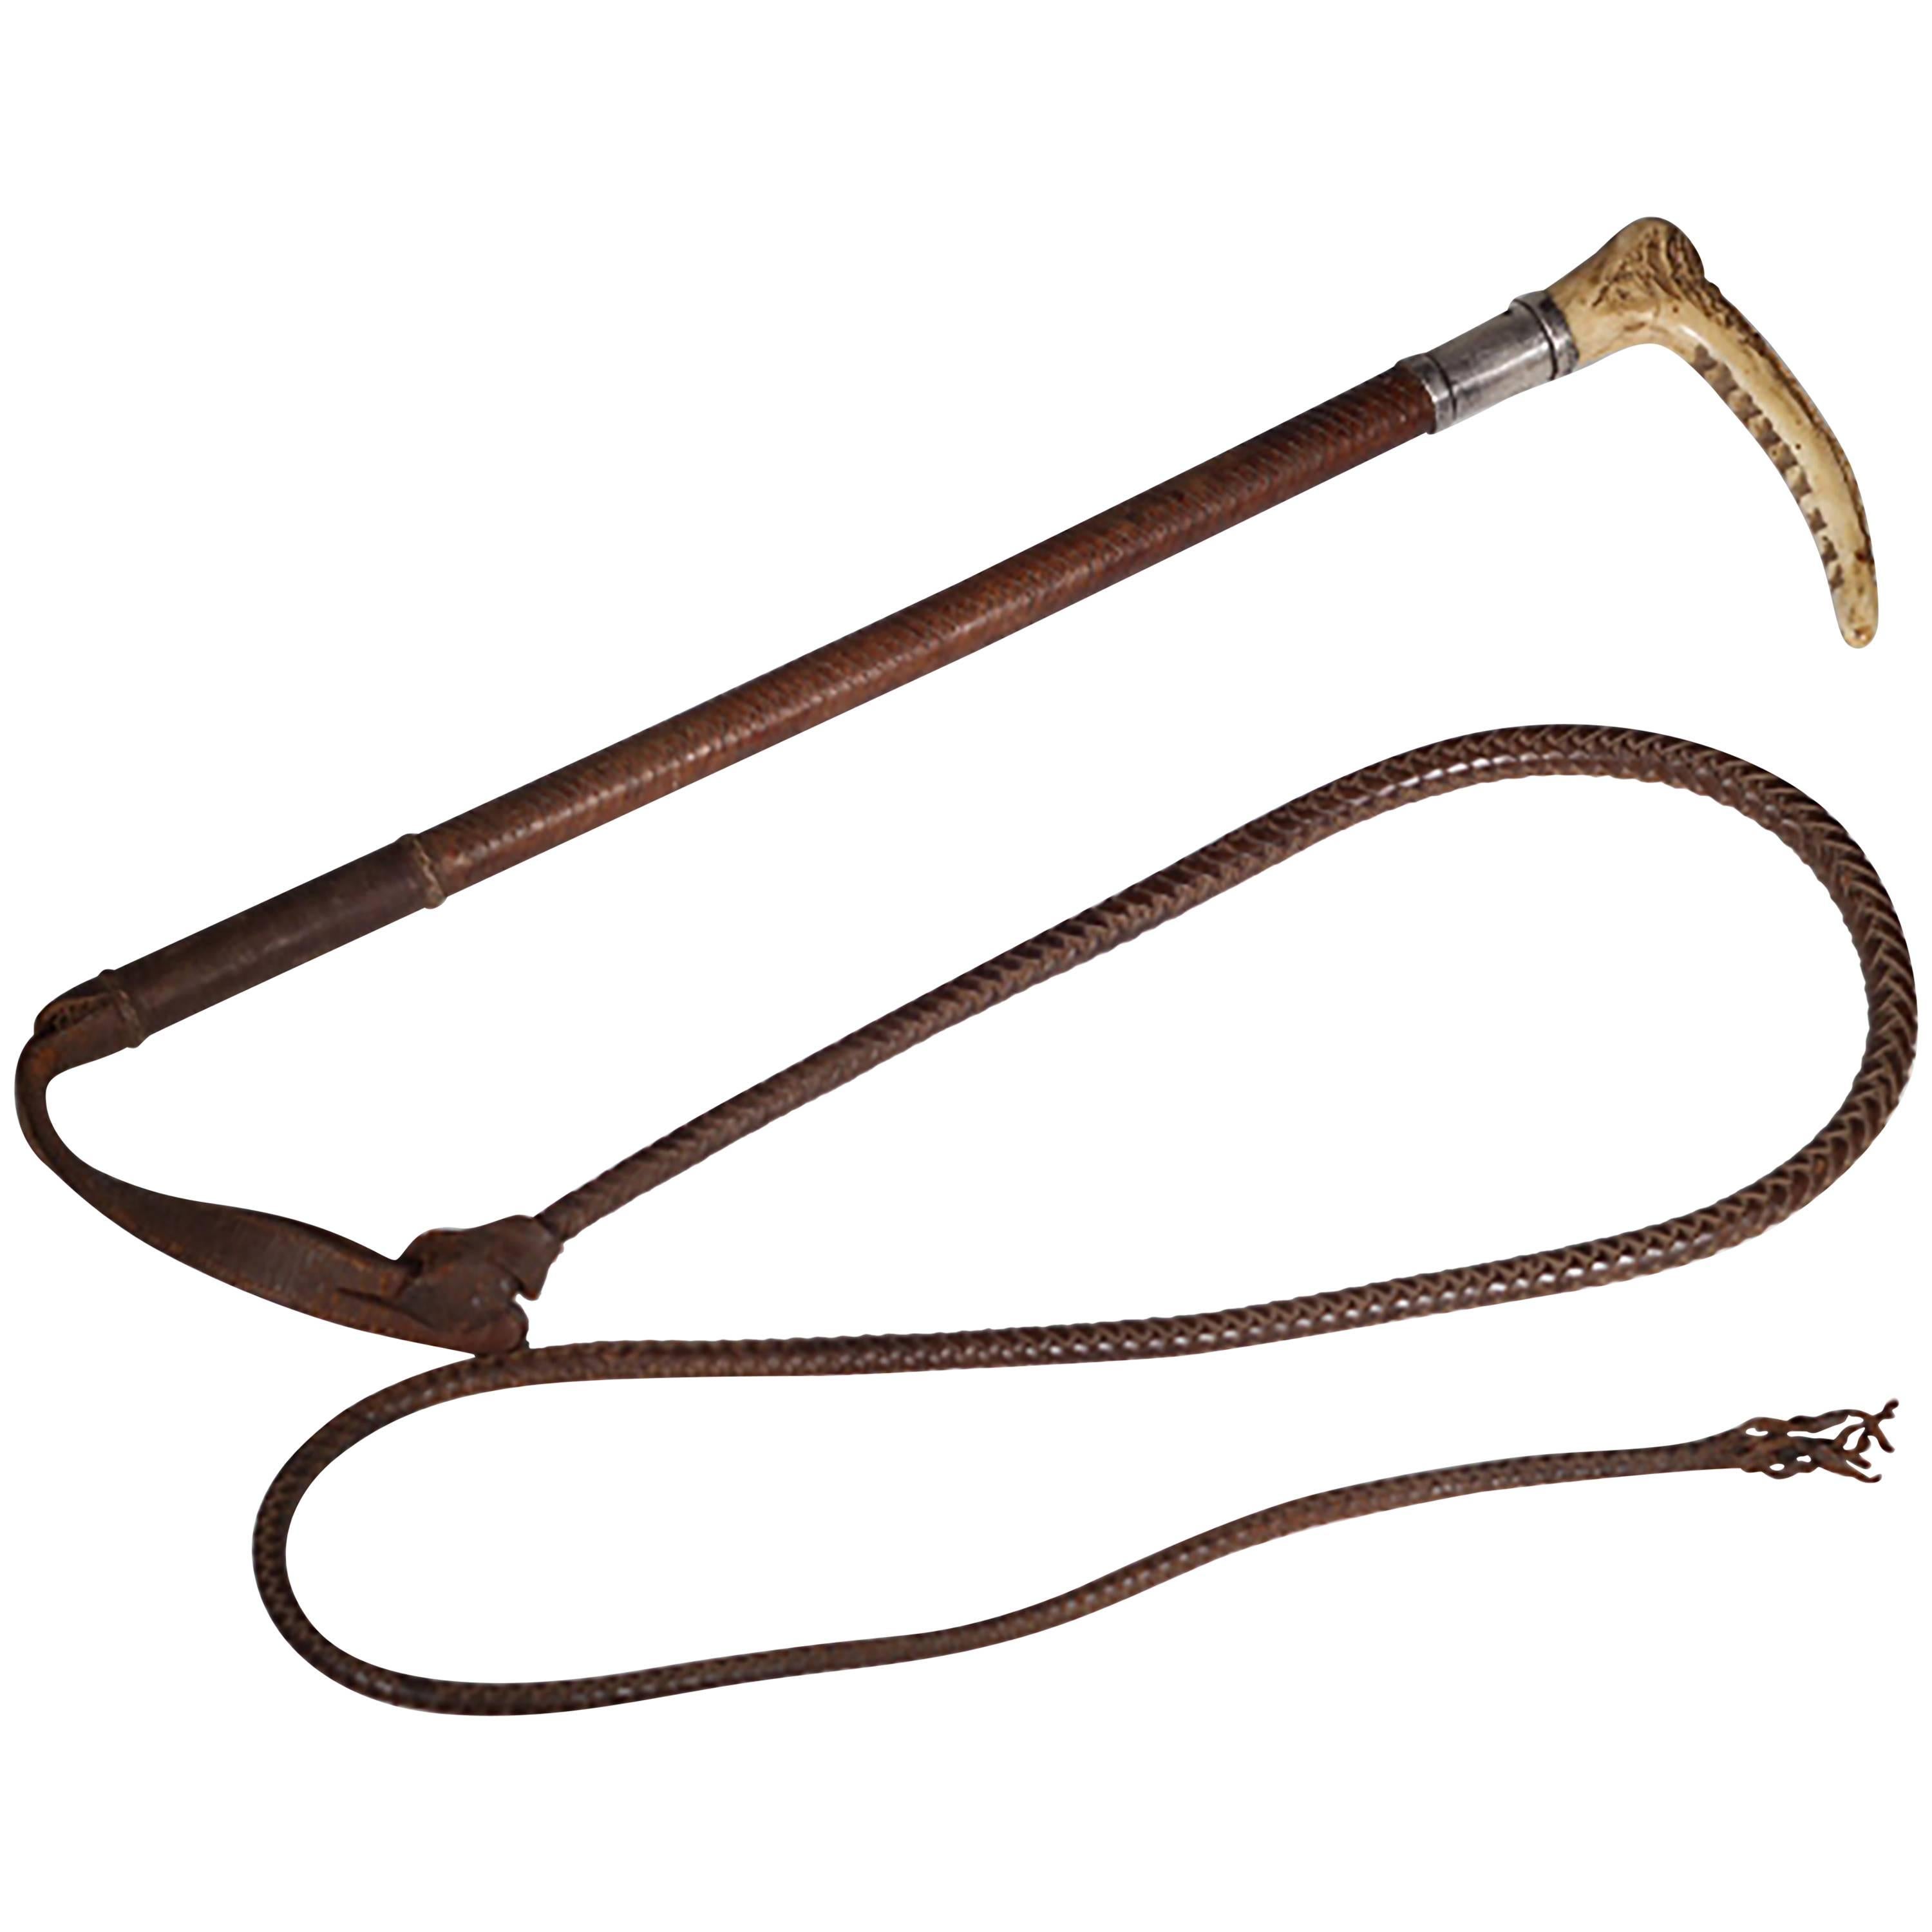 Antique Leather, Horn and Sterling Silver Riding Crop and Whip